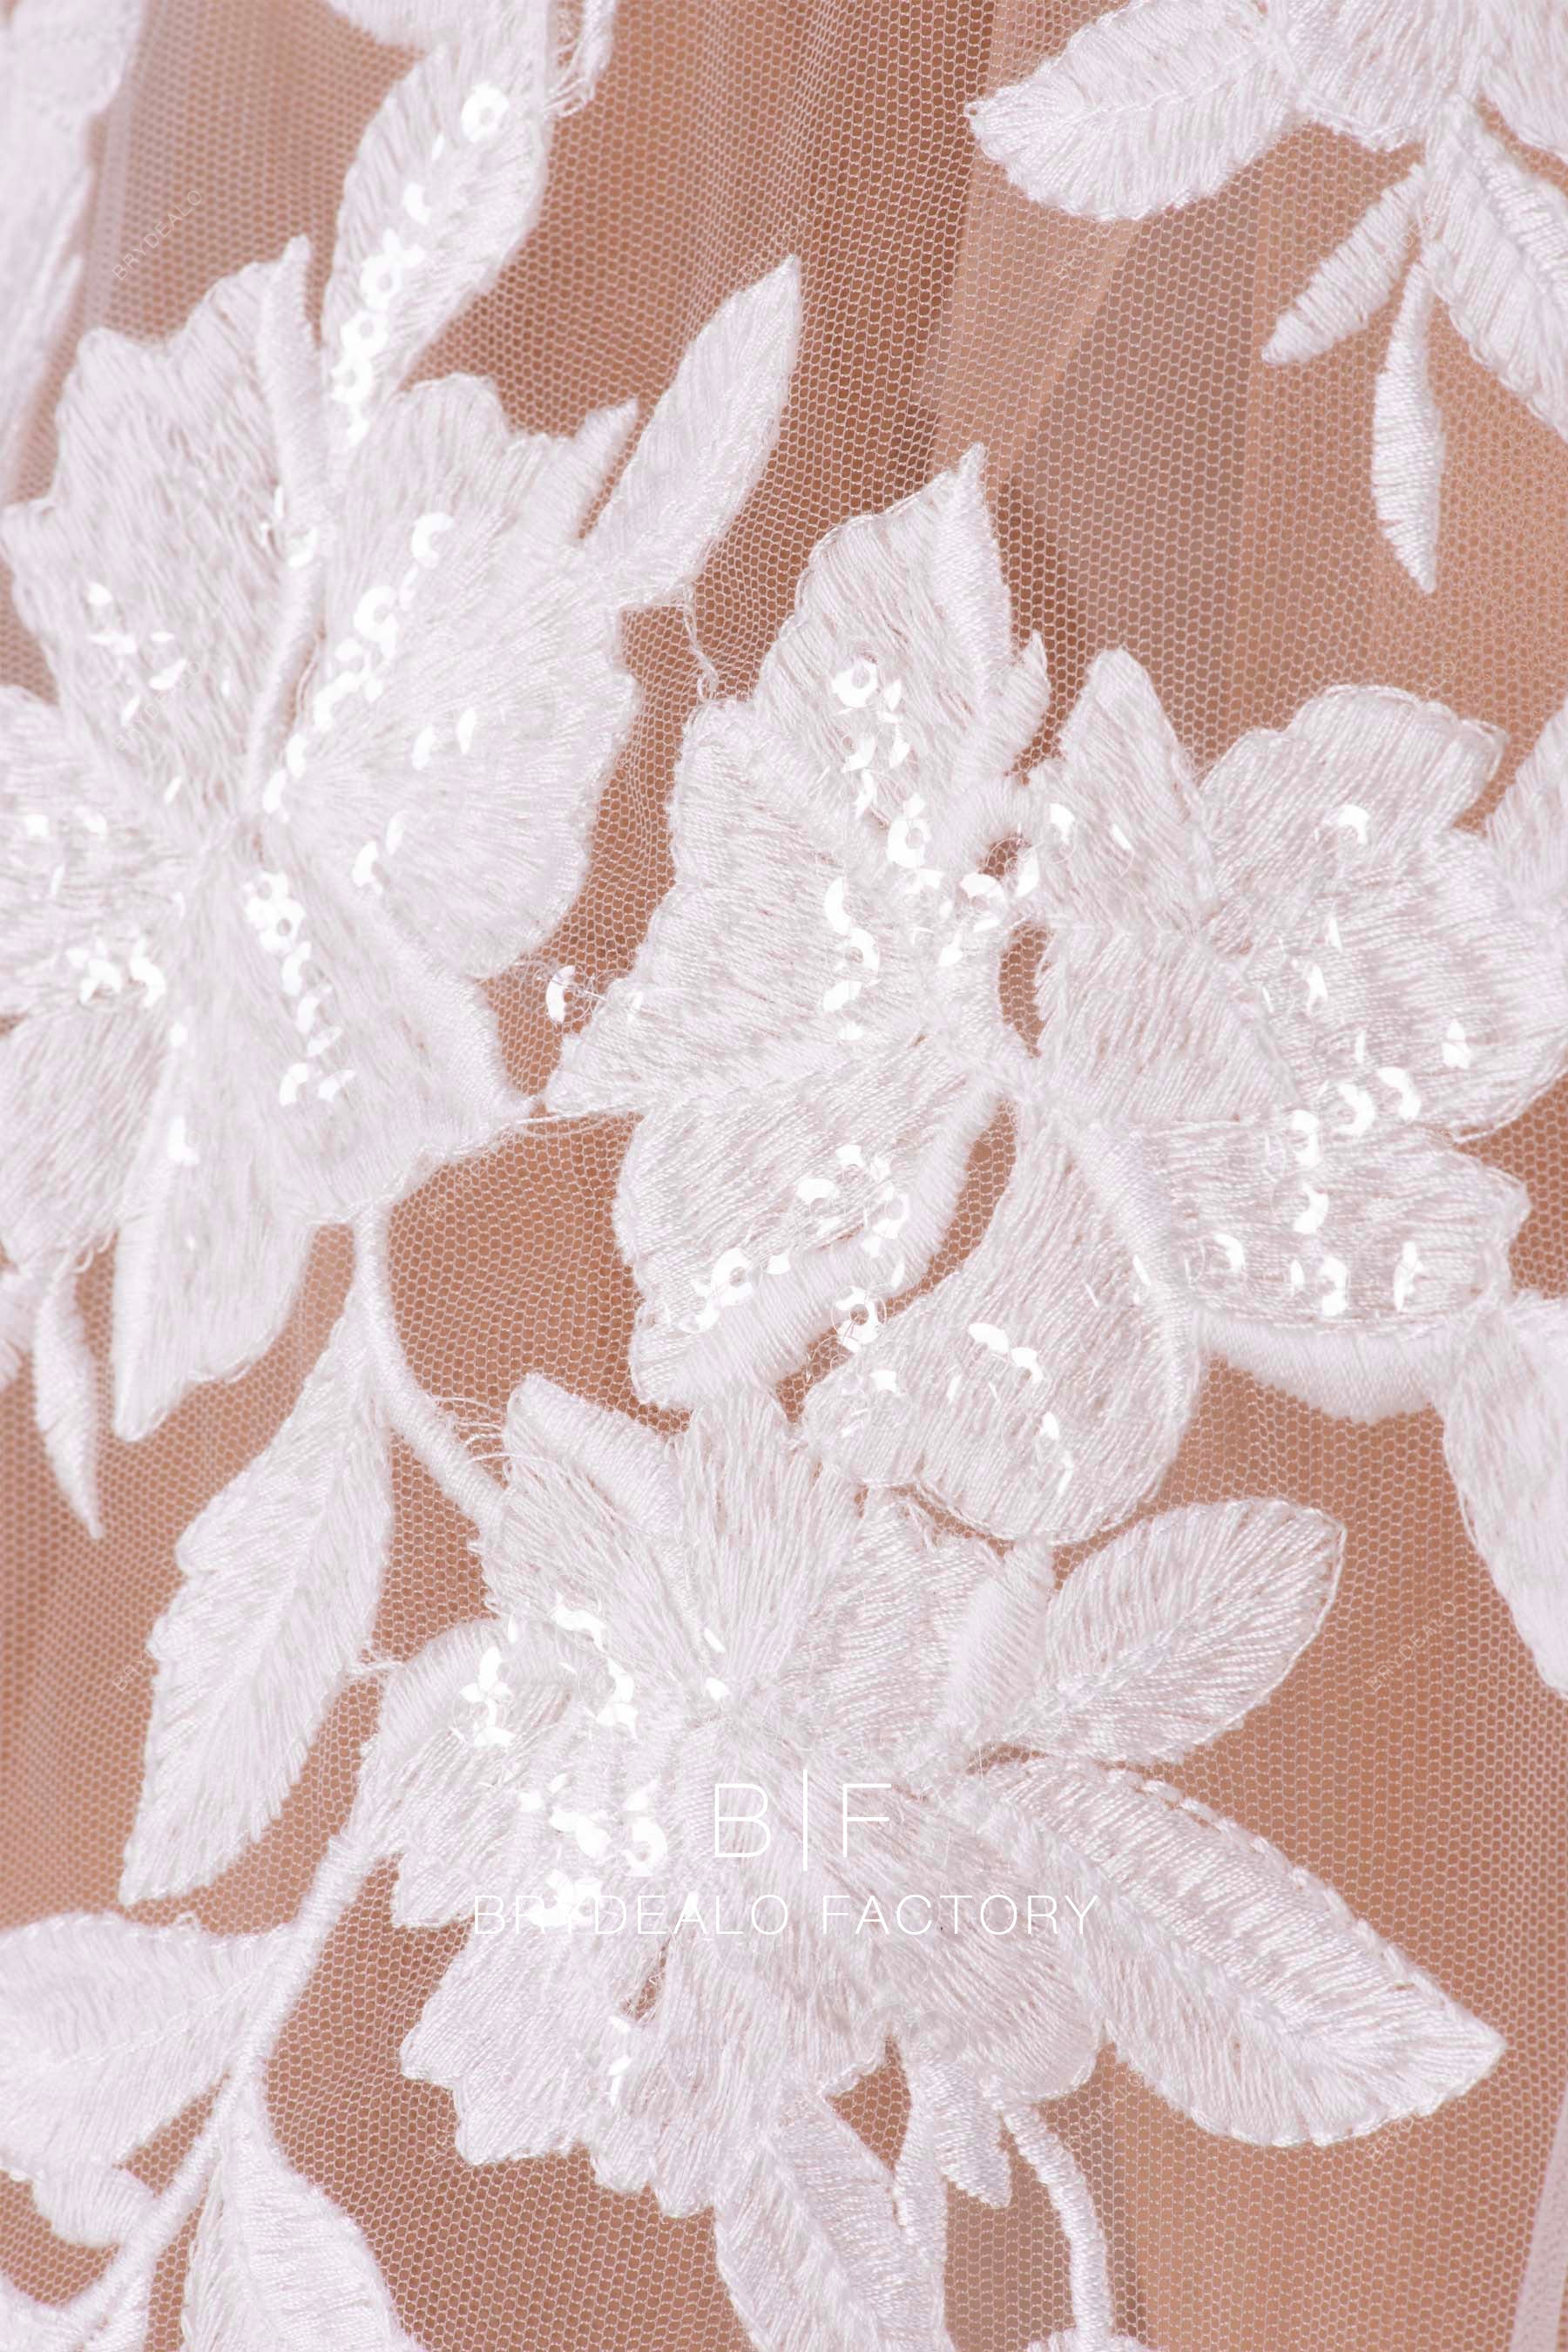 Shimmery Flower Motif Embroidered Lace Online